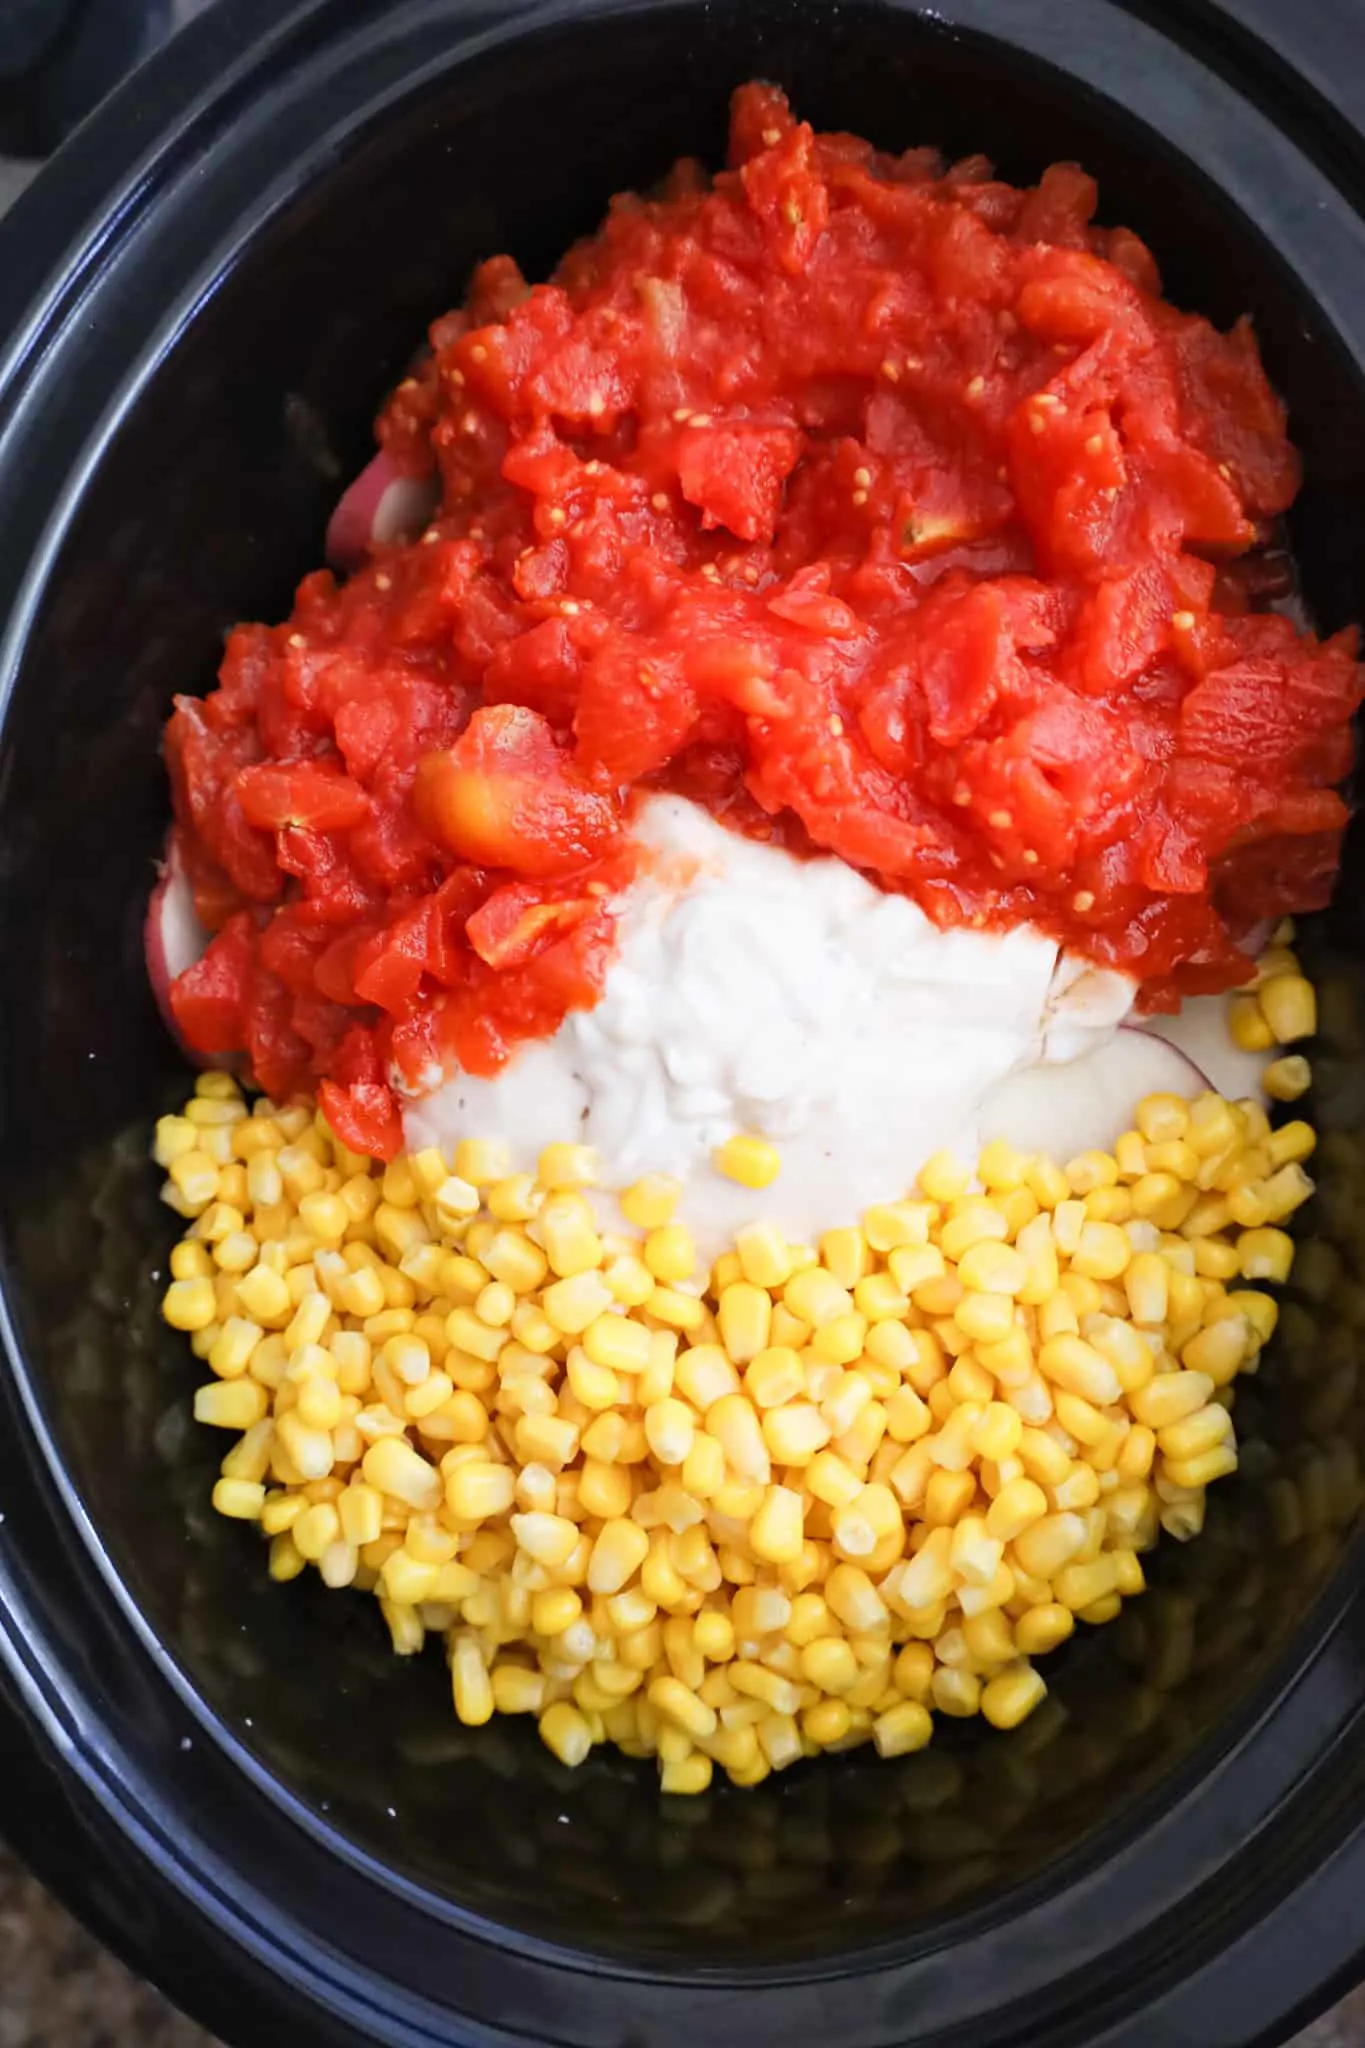 diced tomatoes, cream of mushroom soup and canned corn in a crock pot